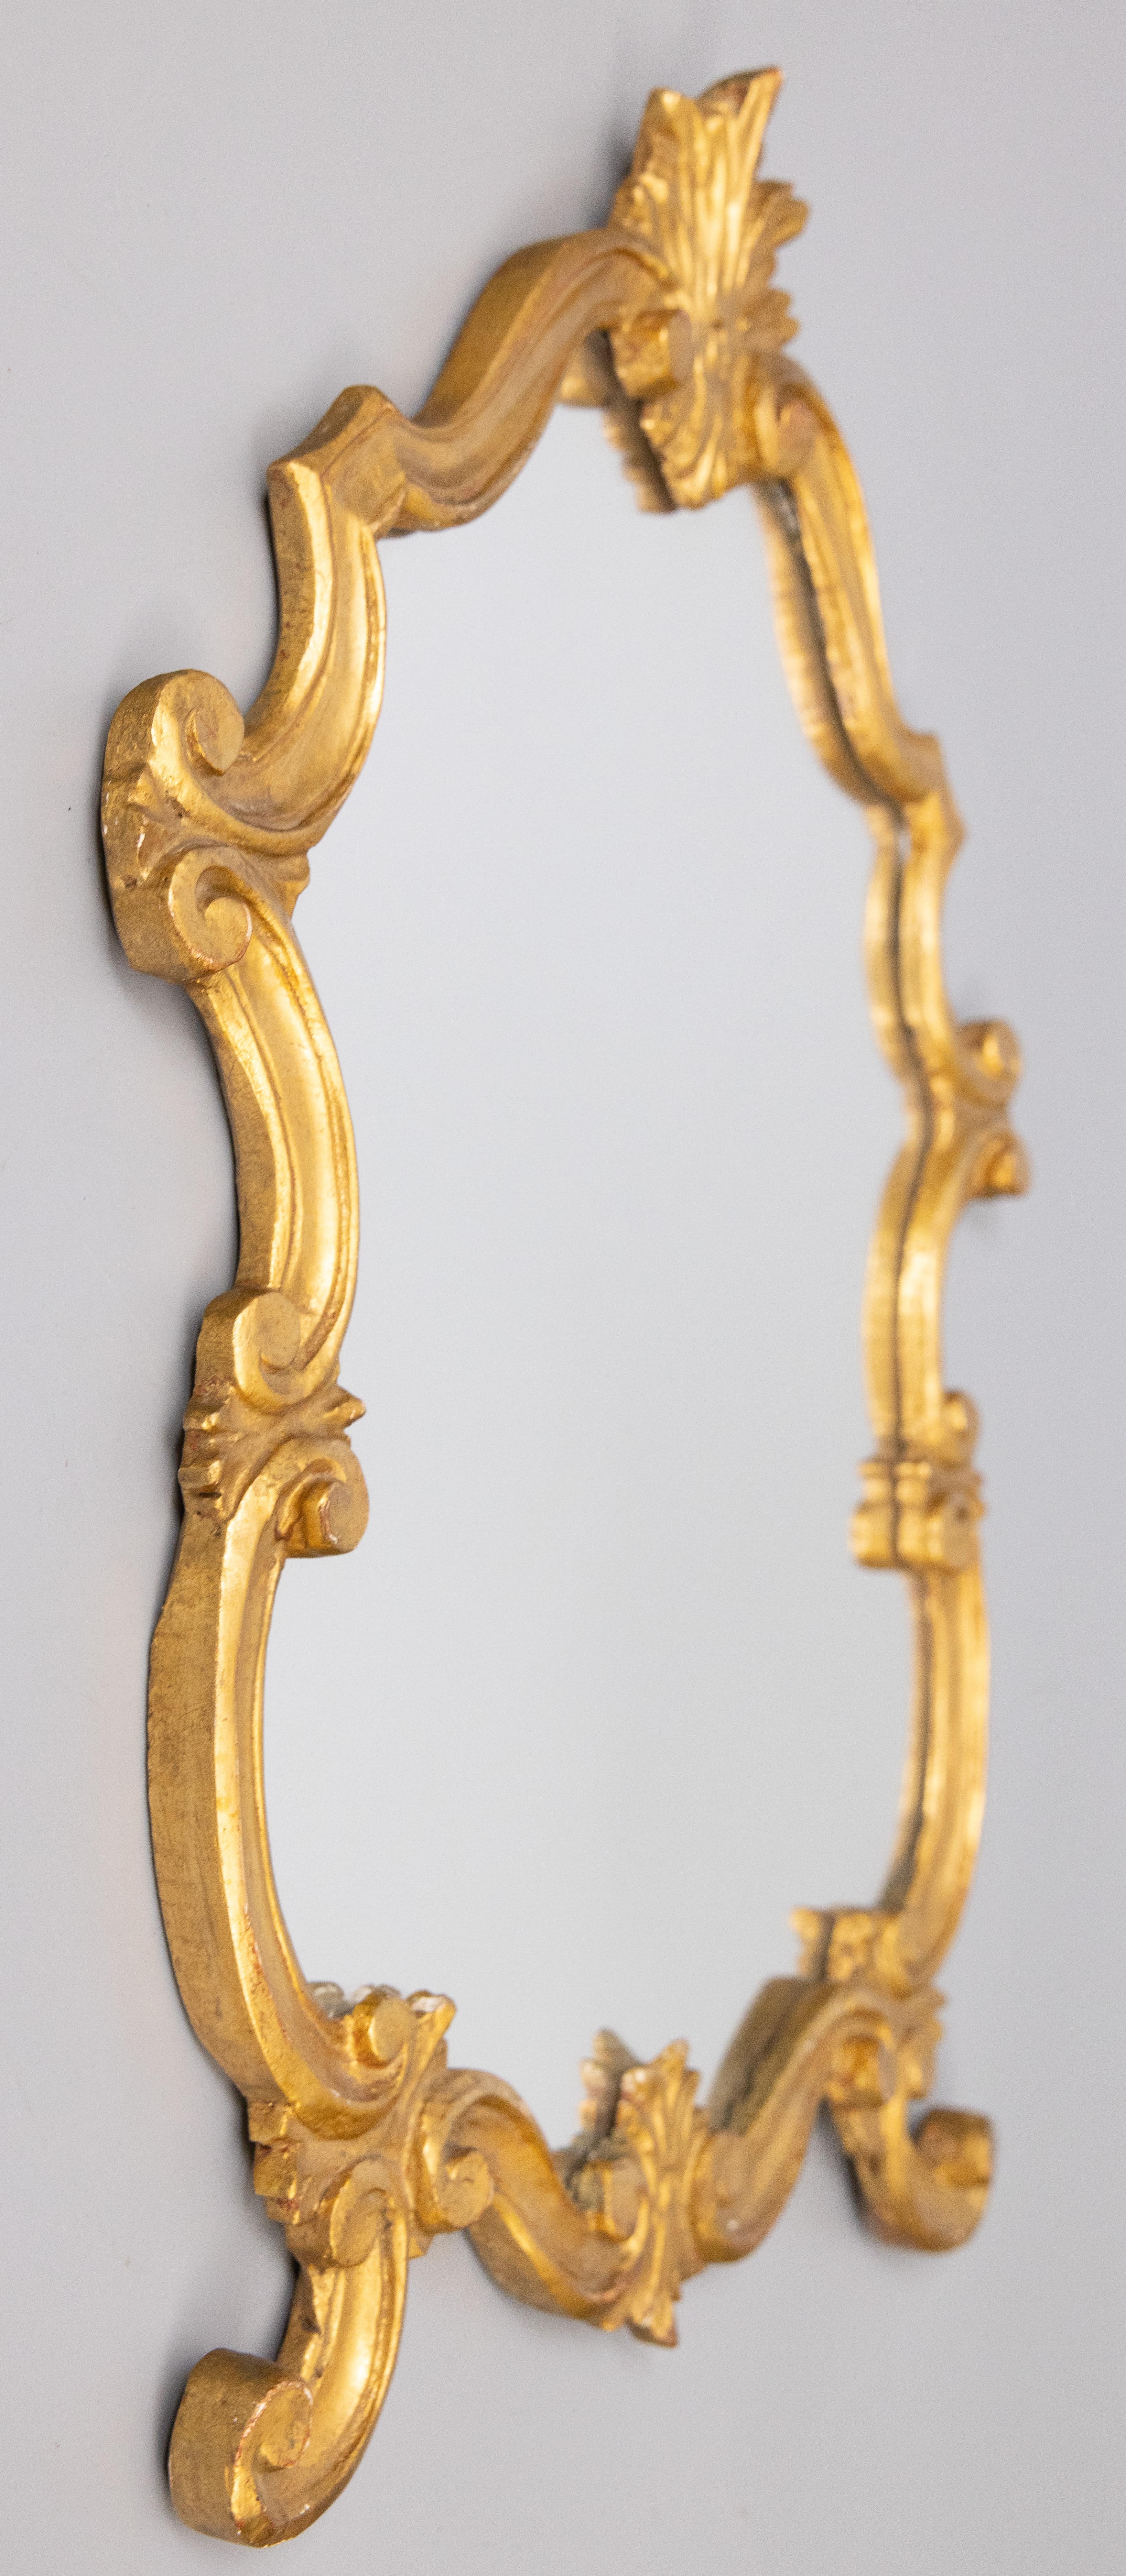 A stunning vintage small-scale Italian Baroque style gilt wood mirror, circa 1950. Marked 